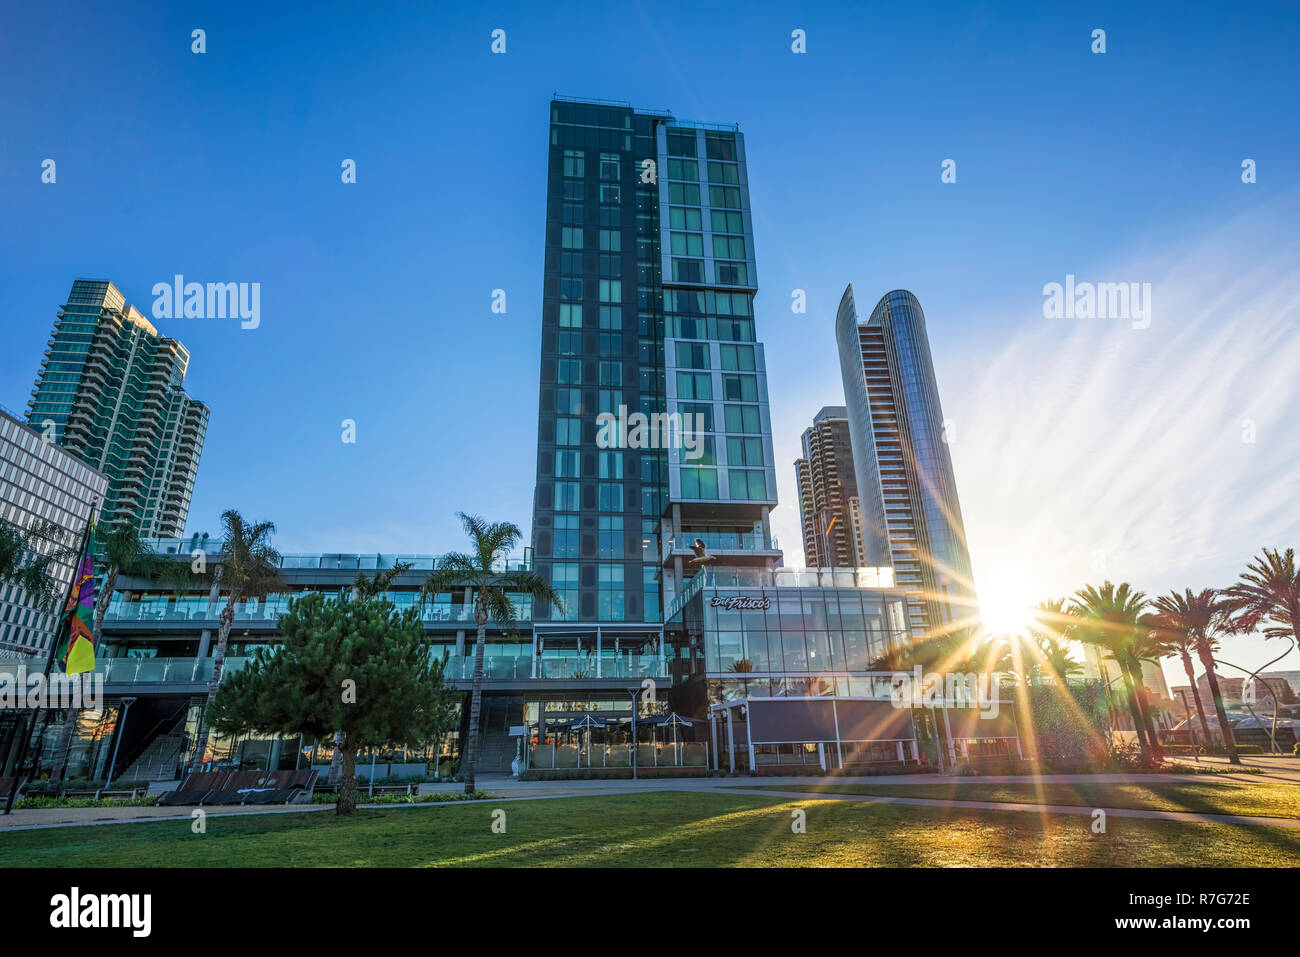 Downtown San Diego, California, USA. View of the Intercontinental San Diego hotel in the early morning. Stock Photo